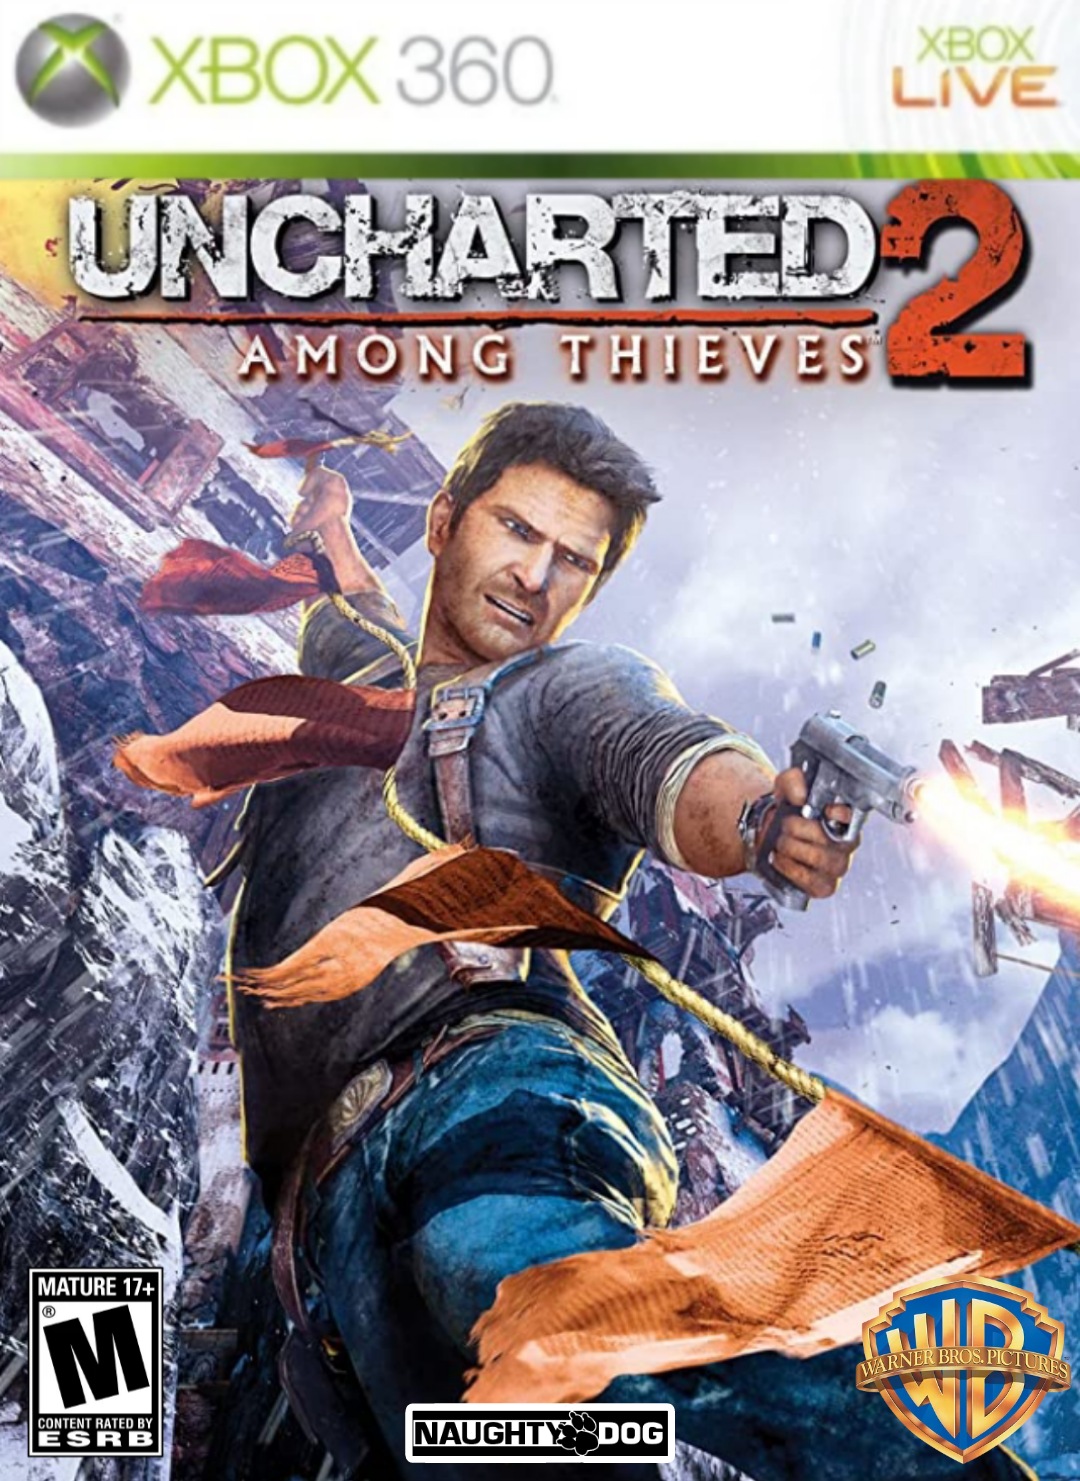 Uncharted: The Outbreak Xbox 360 Box Art Cover by ManBearPig